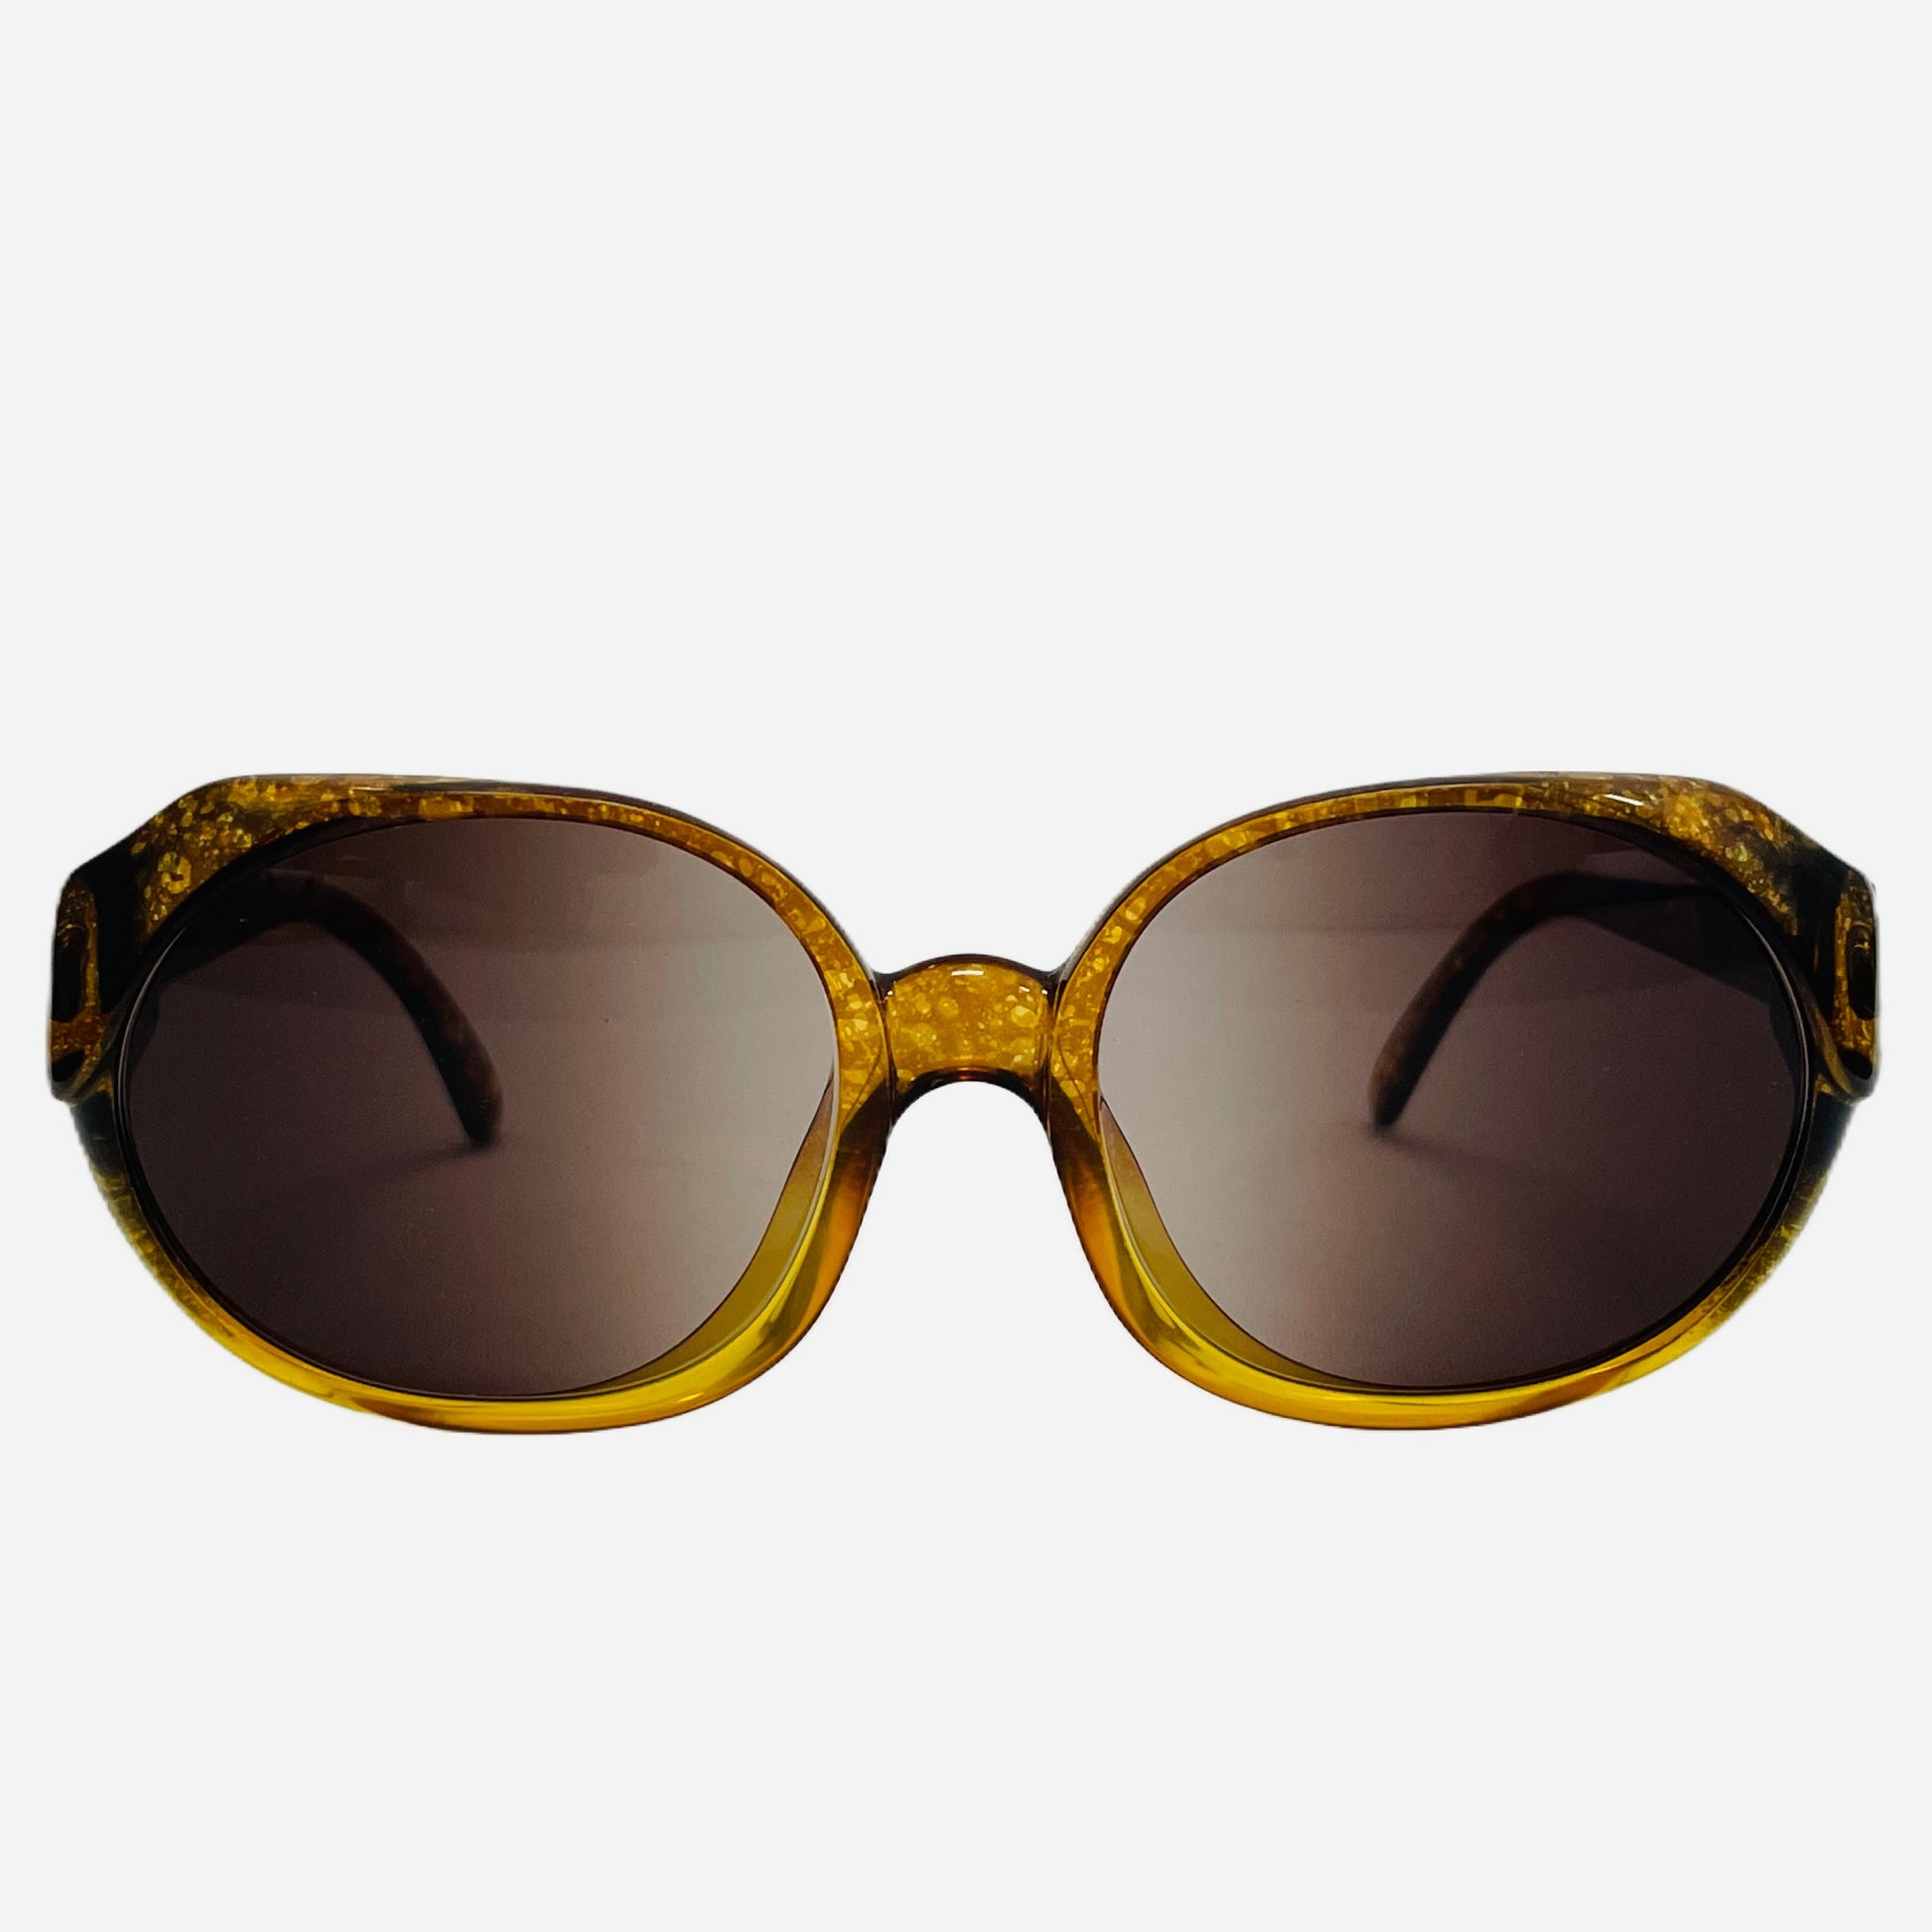 Vintage-Christian-Dior-Sonnenbrille-Sonnenbrille-2019-Optyl-the-seekers